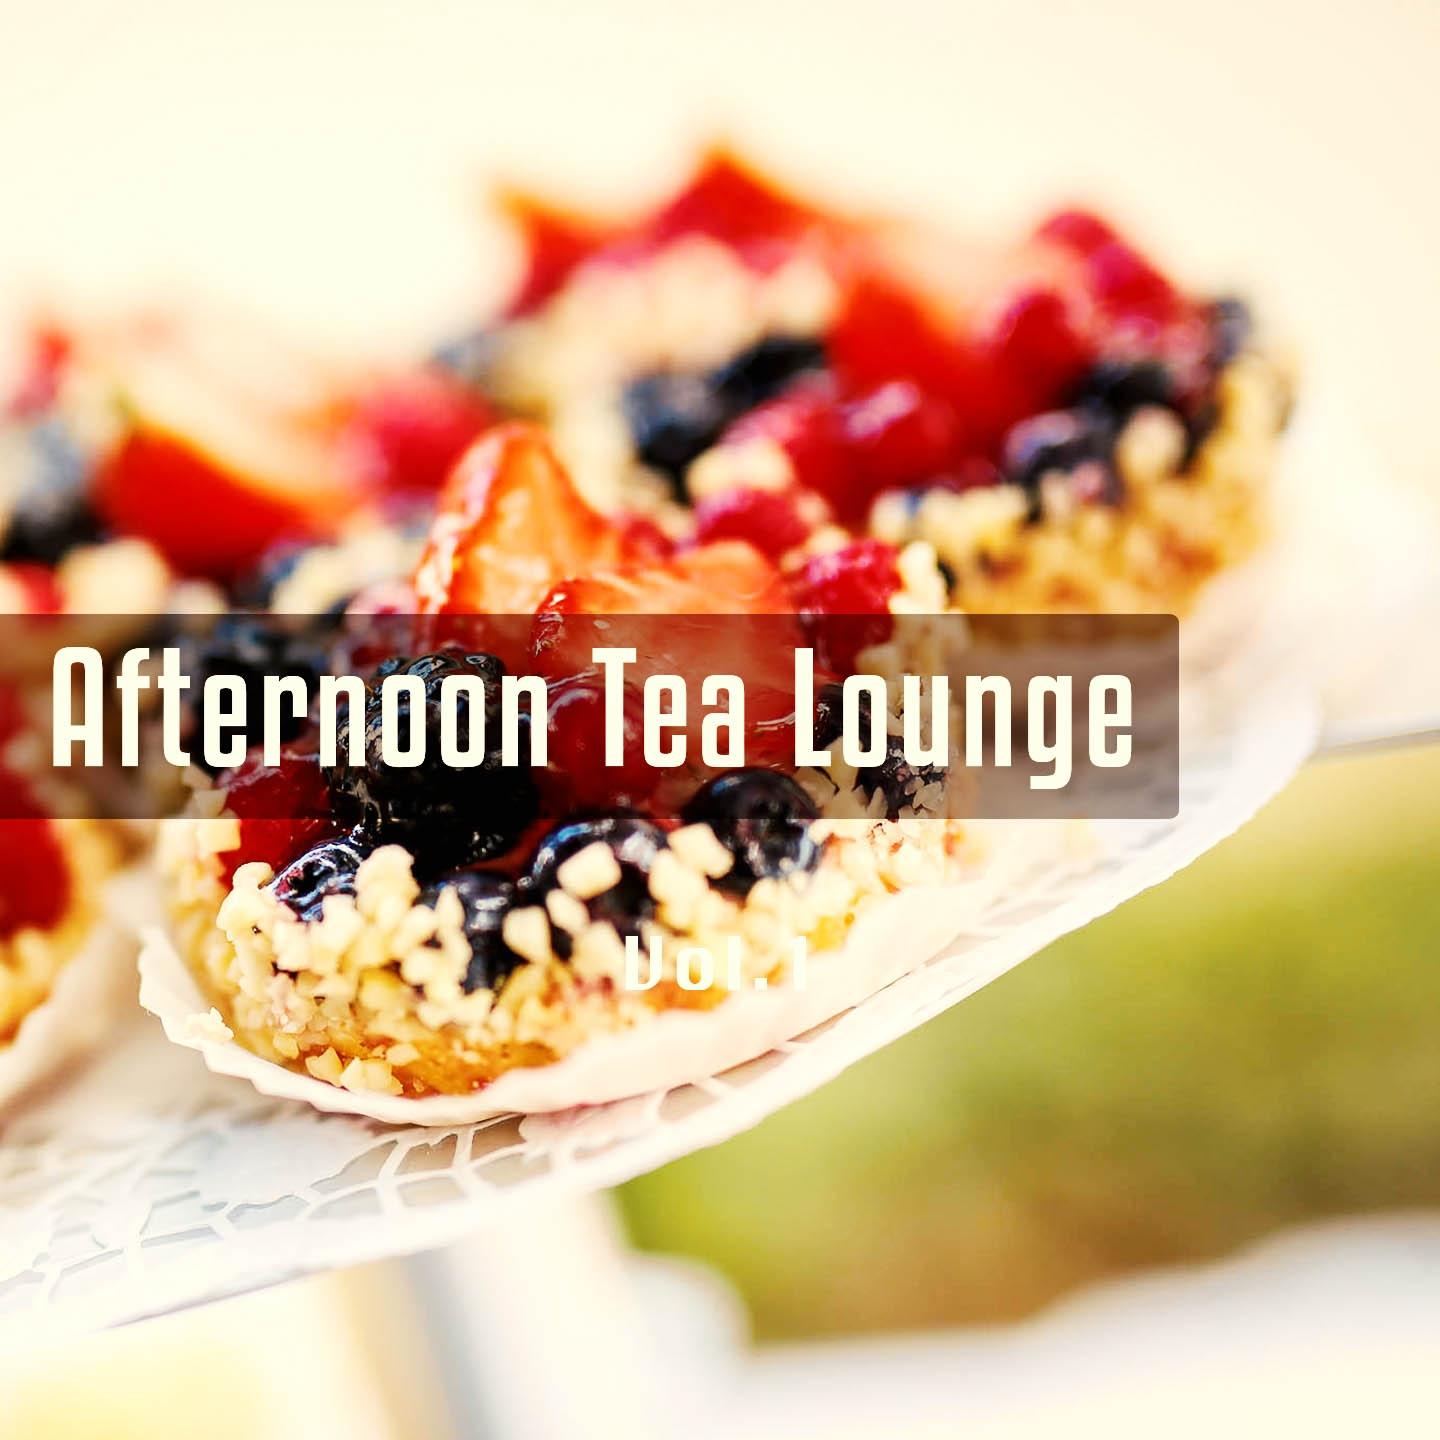 Afternoon Tea Lounge, Vol. 1 (Smooth Jazz and Lounge Tunes for a Relaxed Afternoon)